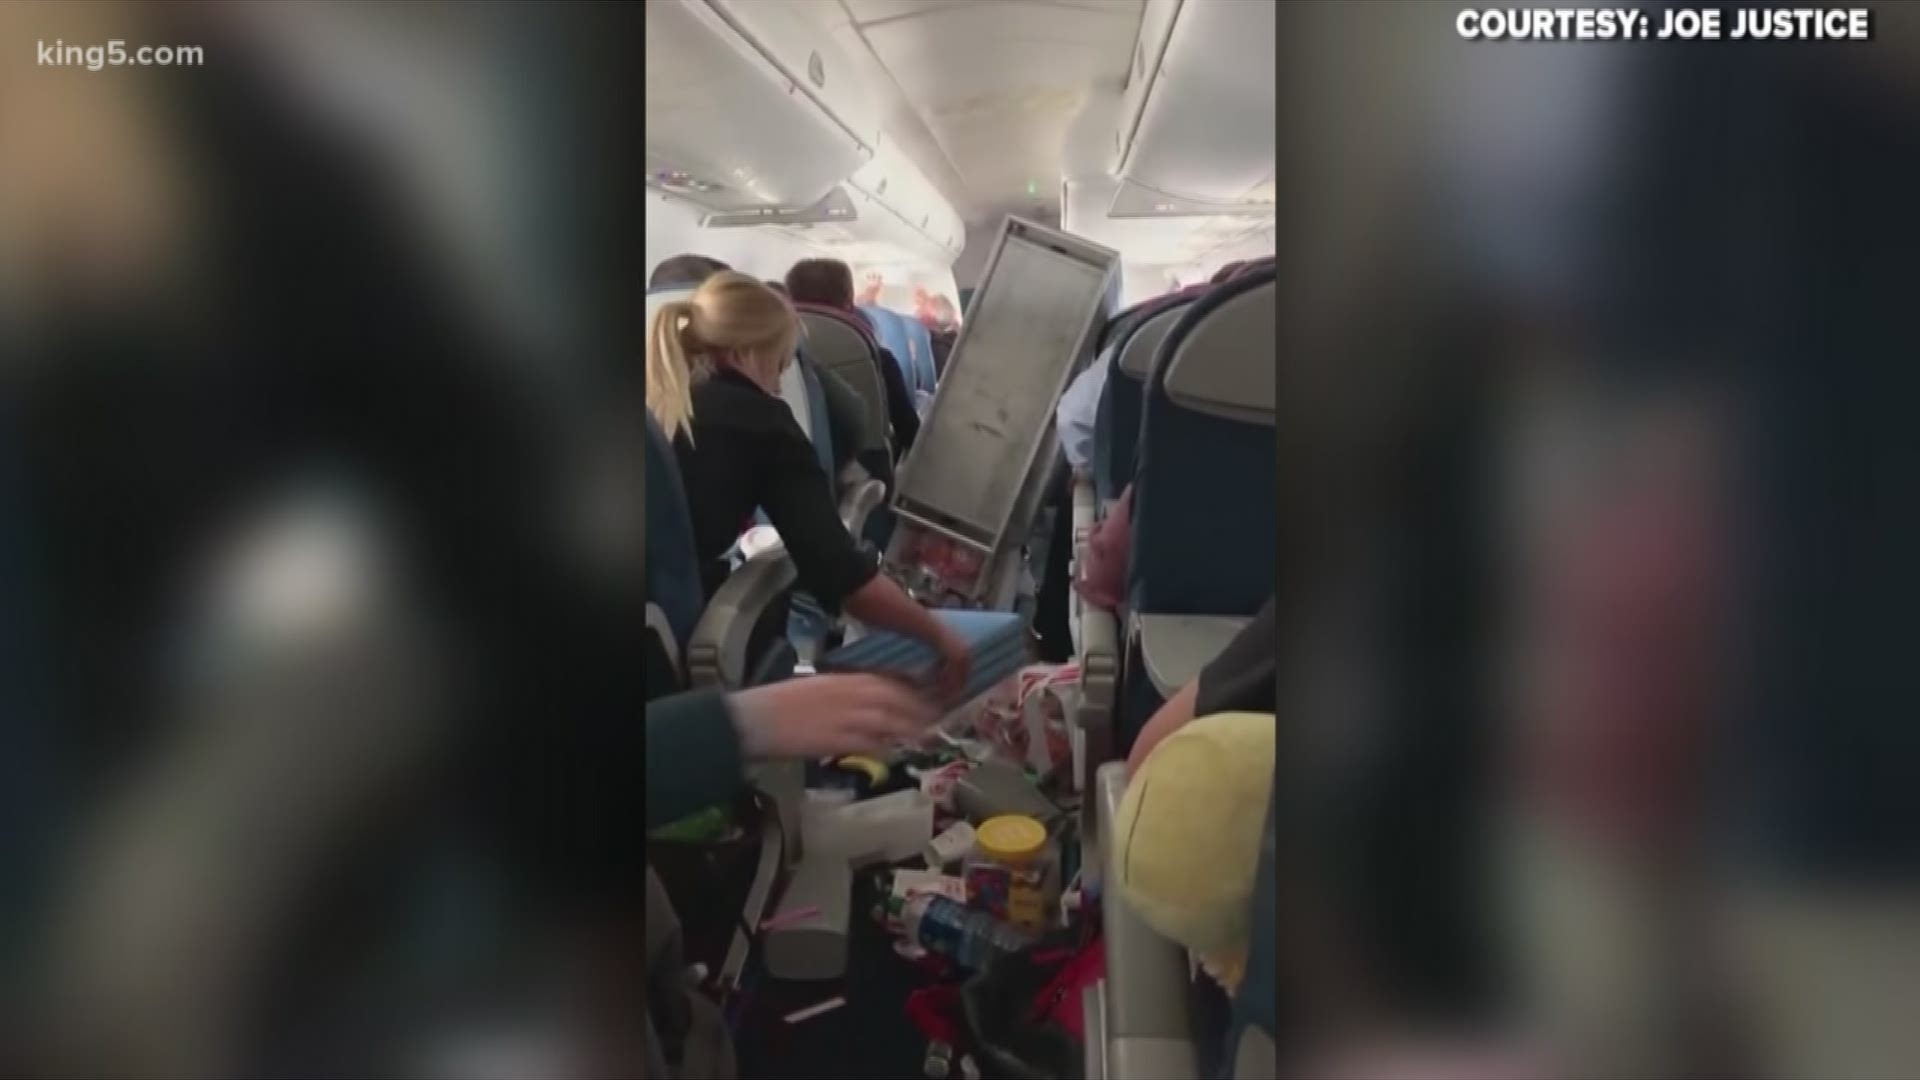 Passenger describes severe turbulence on Seattle-bound flight: "Always wear your seatbelt." Three people were hospitalized after the flight made an emergency landing in Reno.